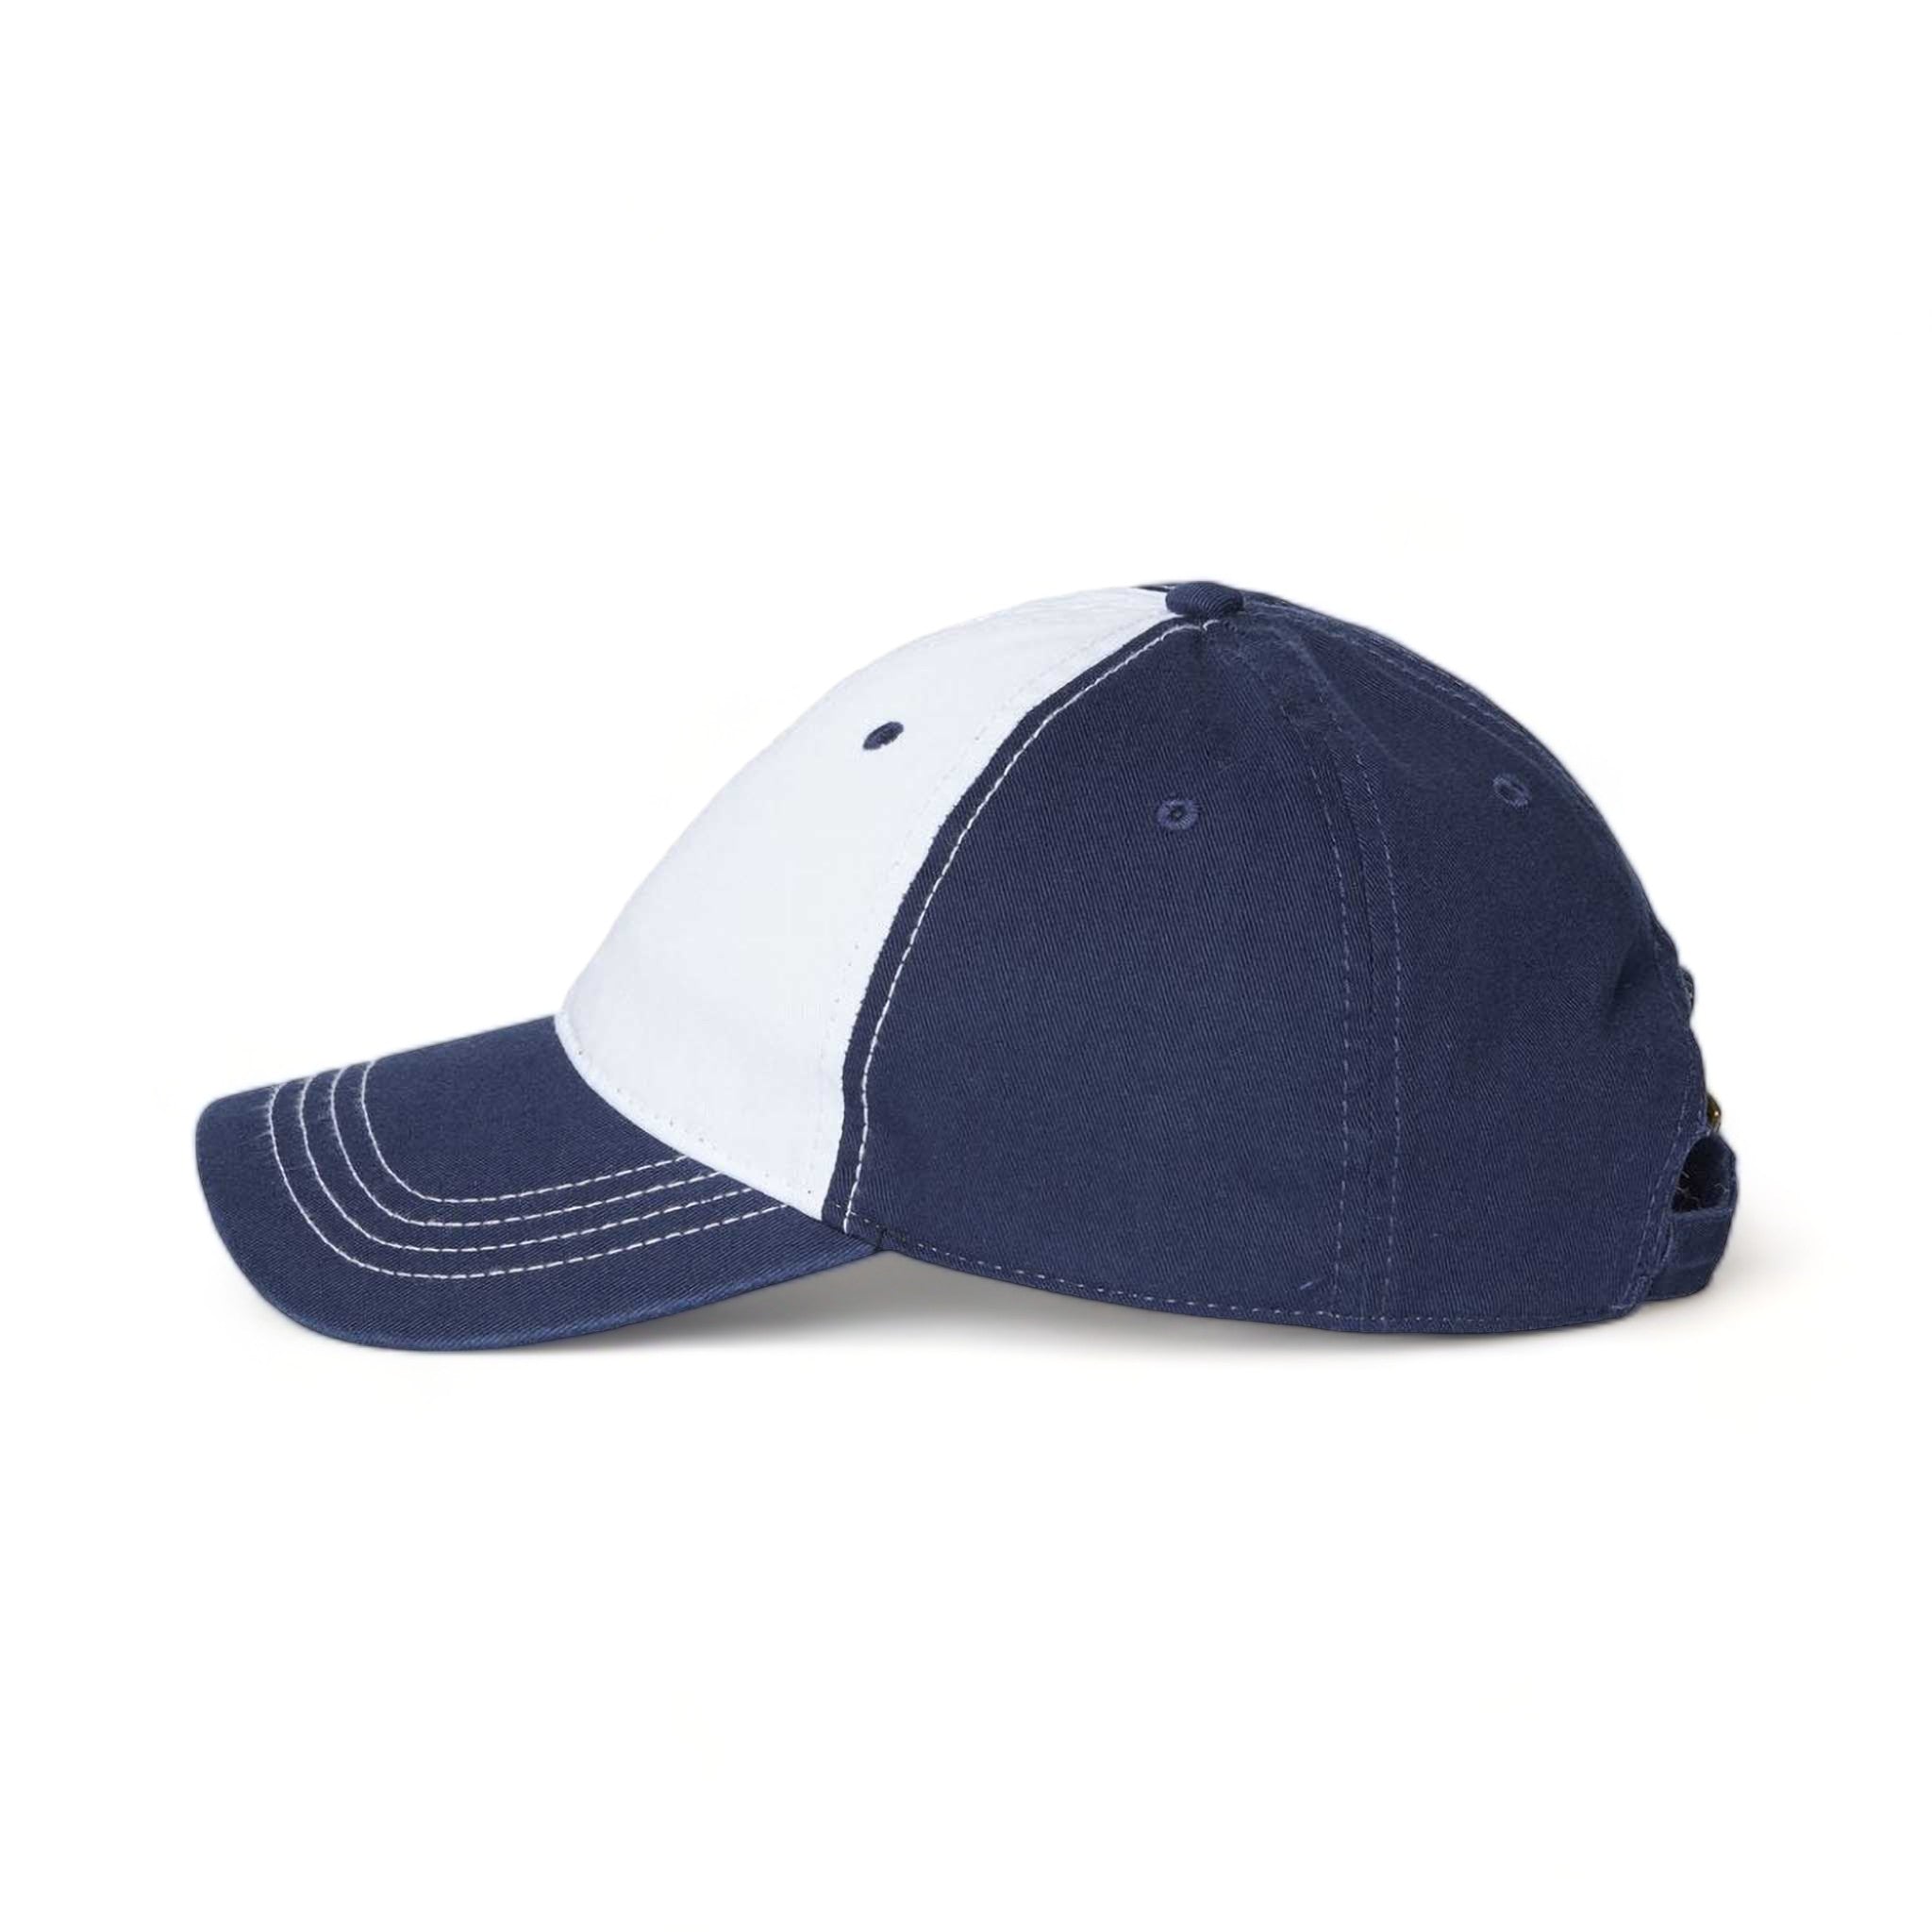 Side view of CAP AMERICA i1002 custom hat in white and light navy